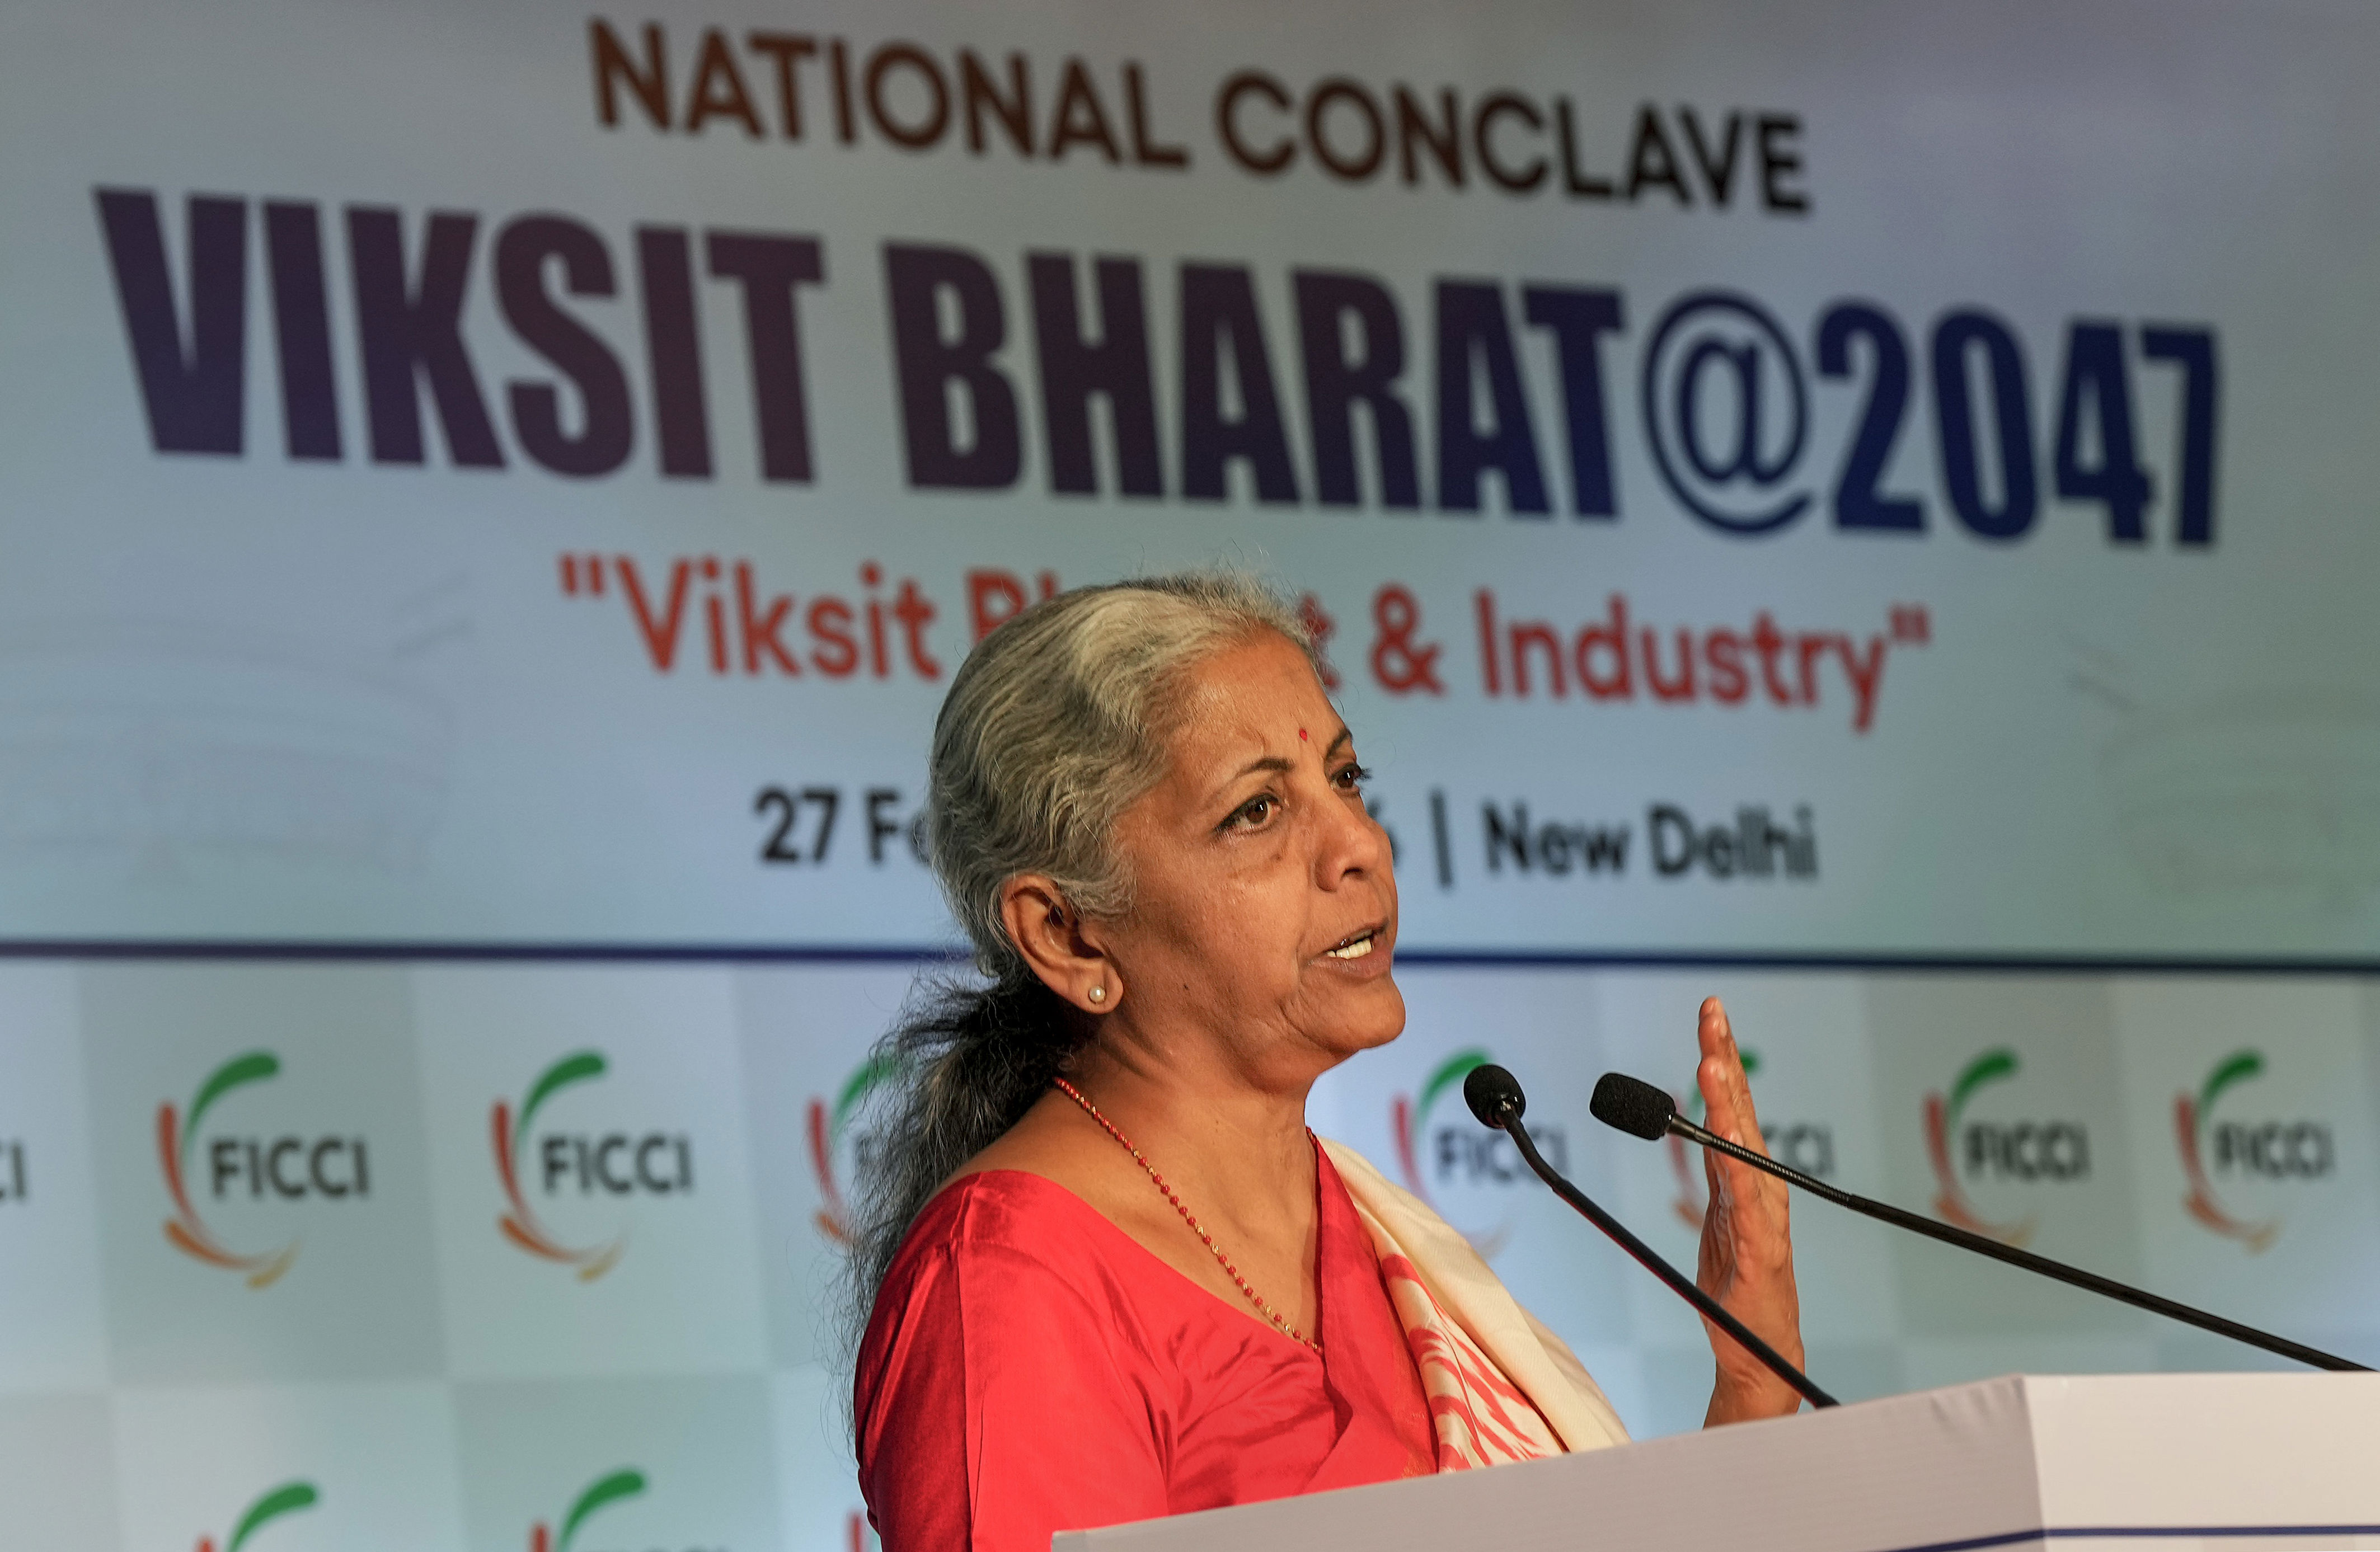 sitharaman confident of india inc aligning to country's developmental goals